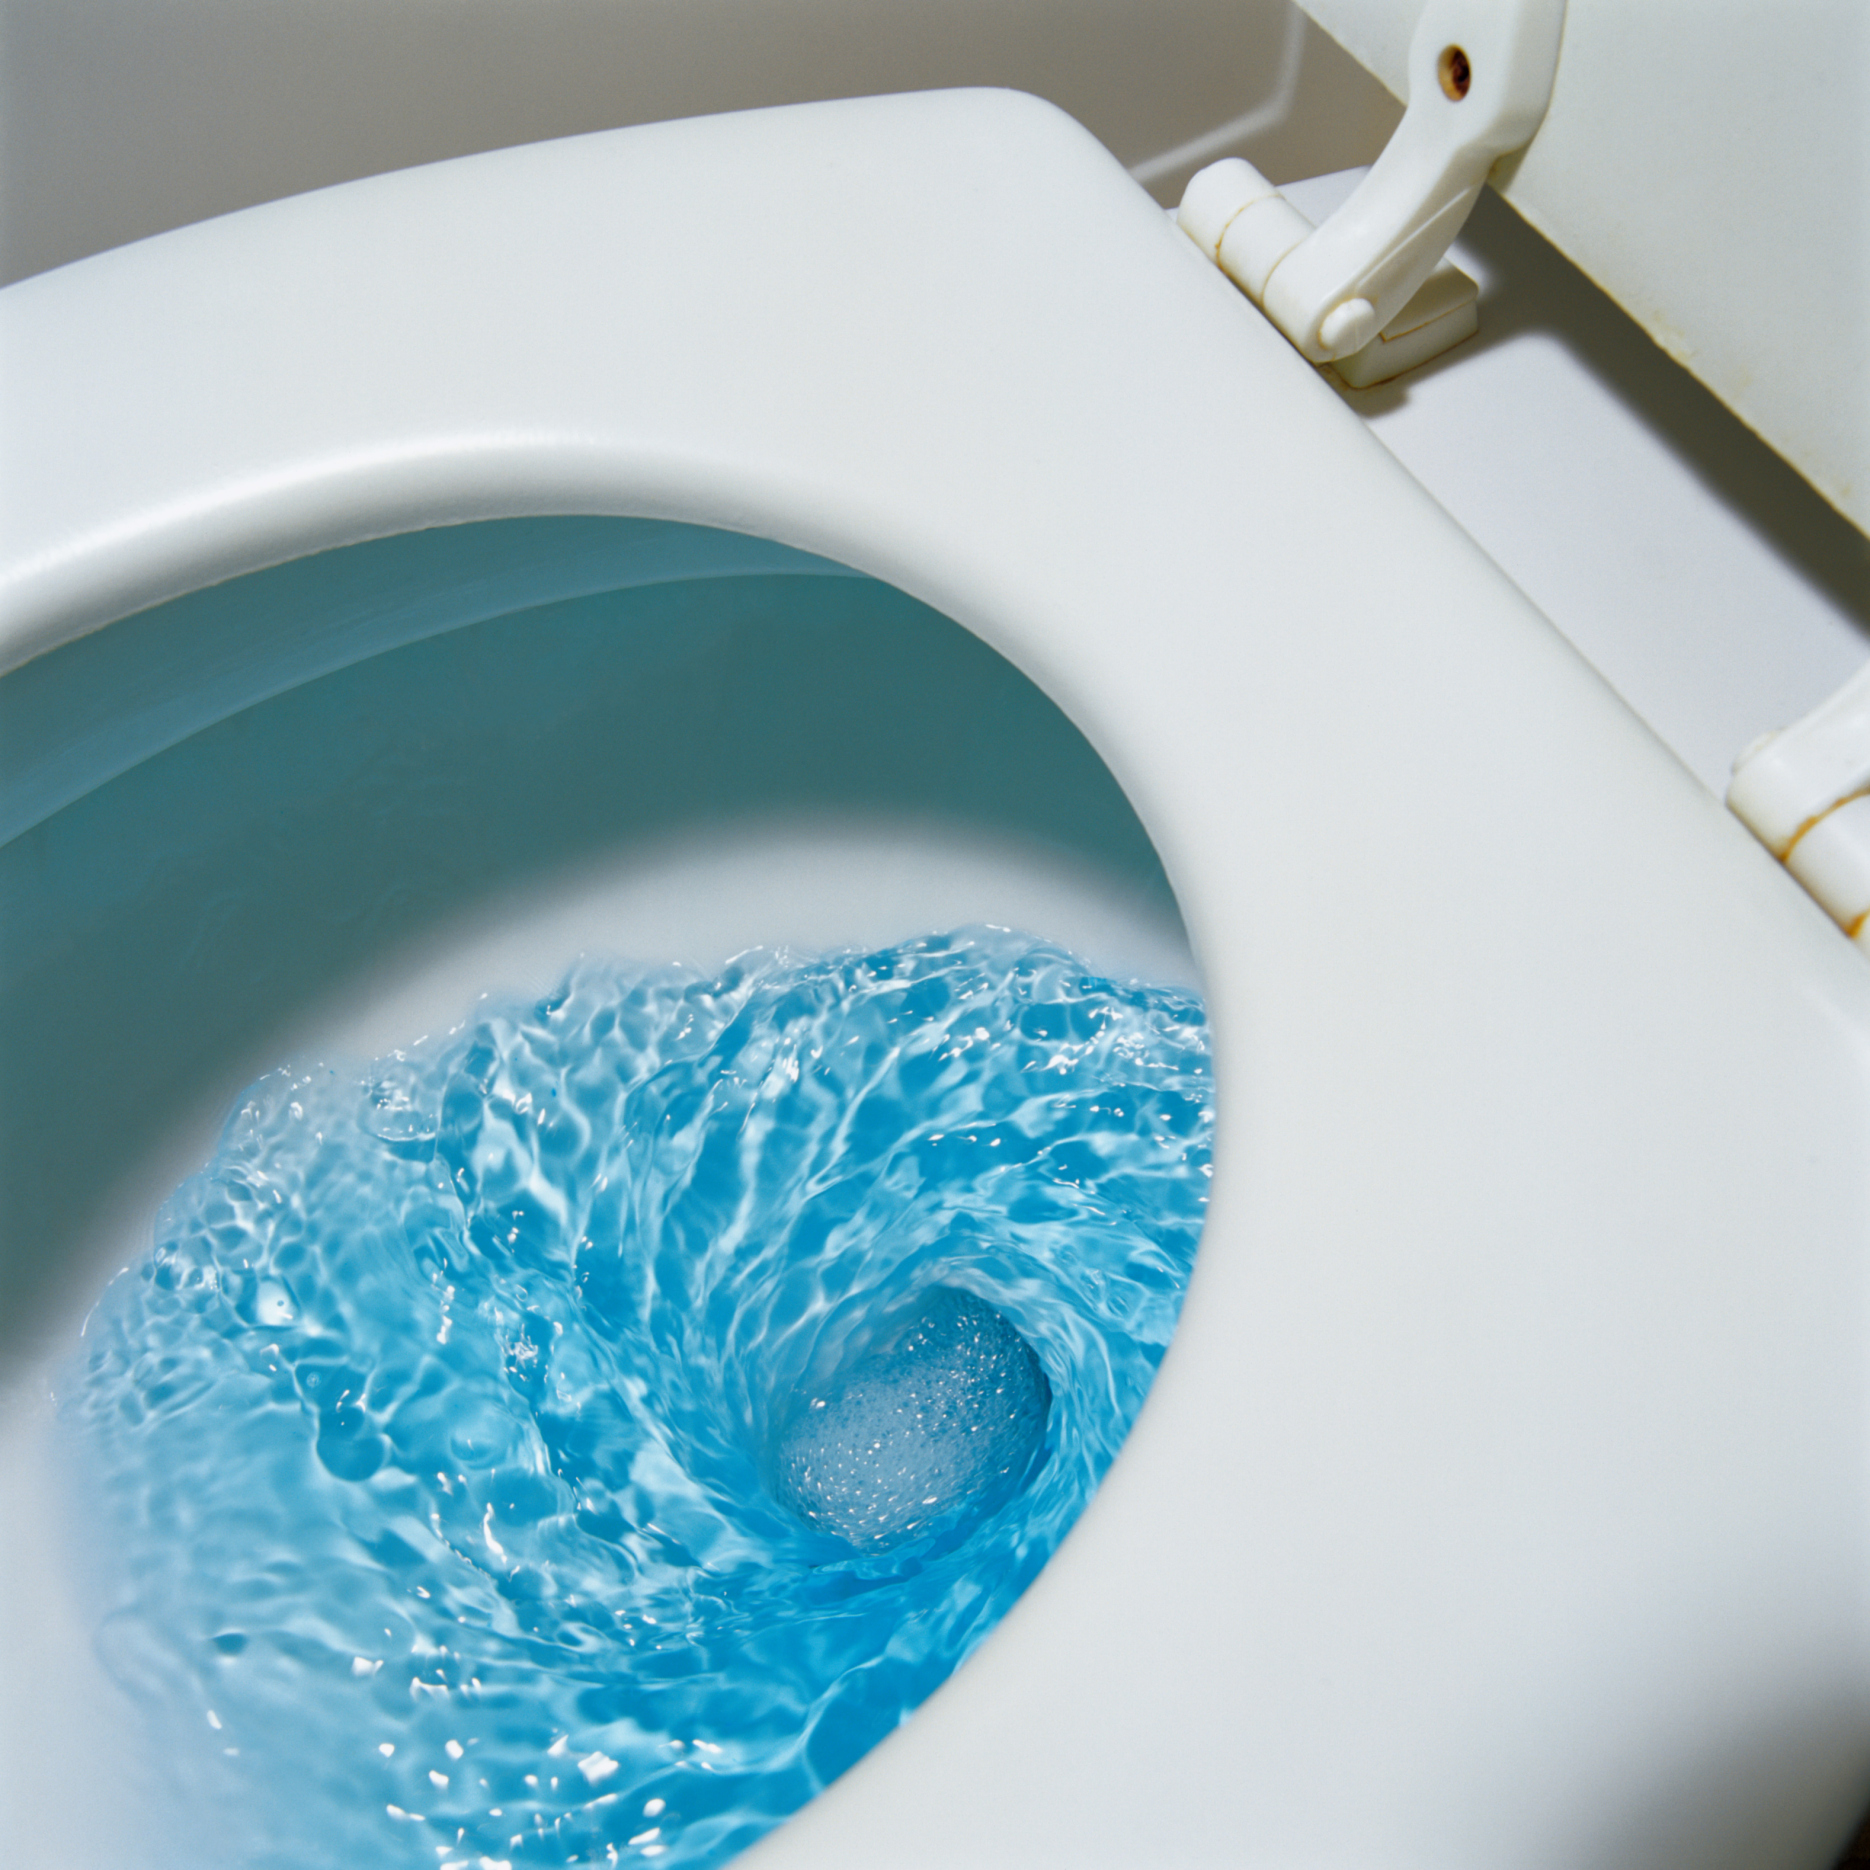 Possible Causes of a Weak Flushing Toilet ehow